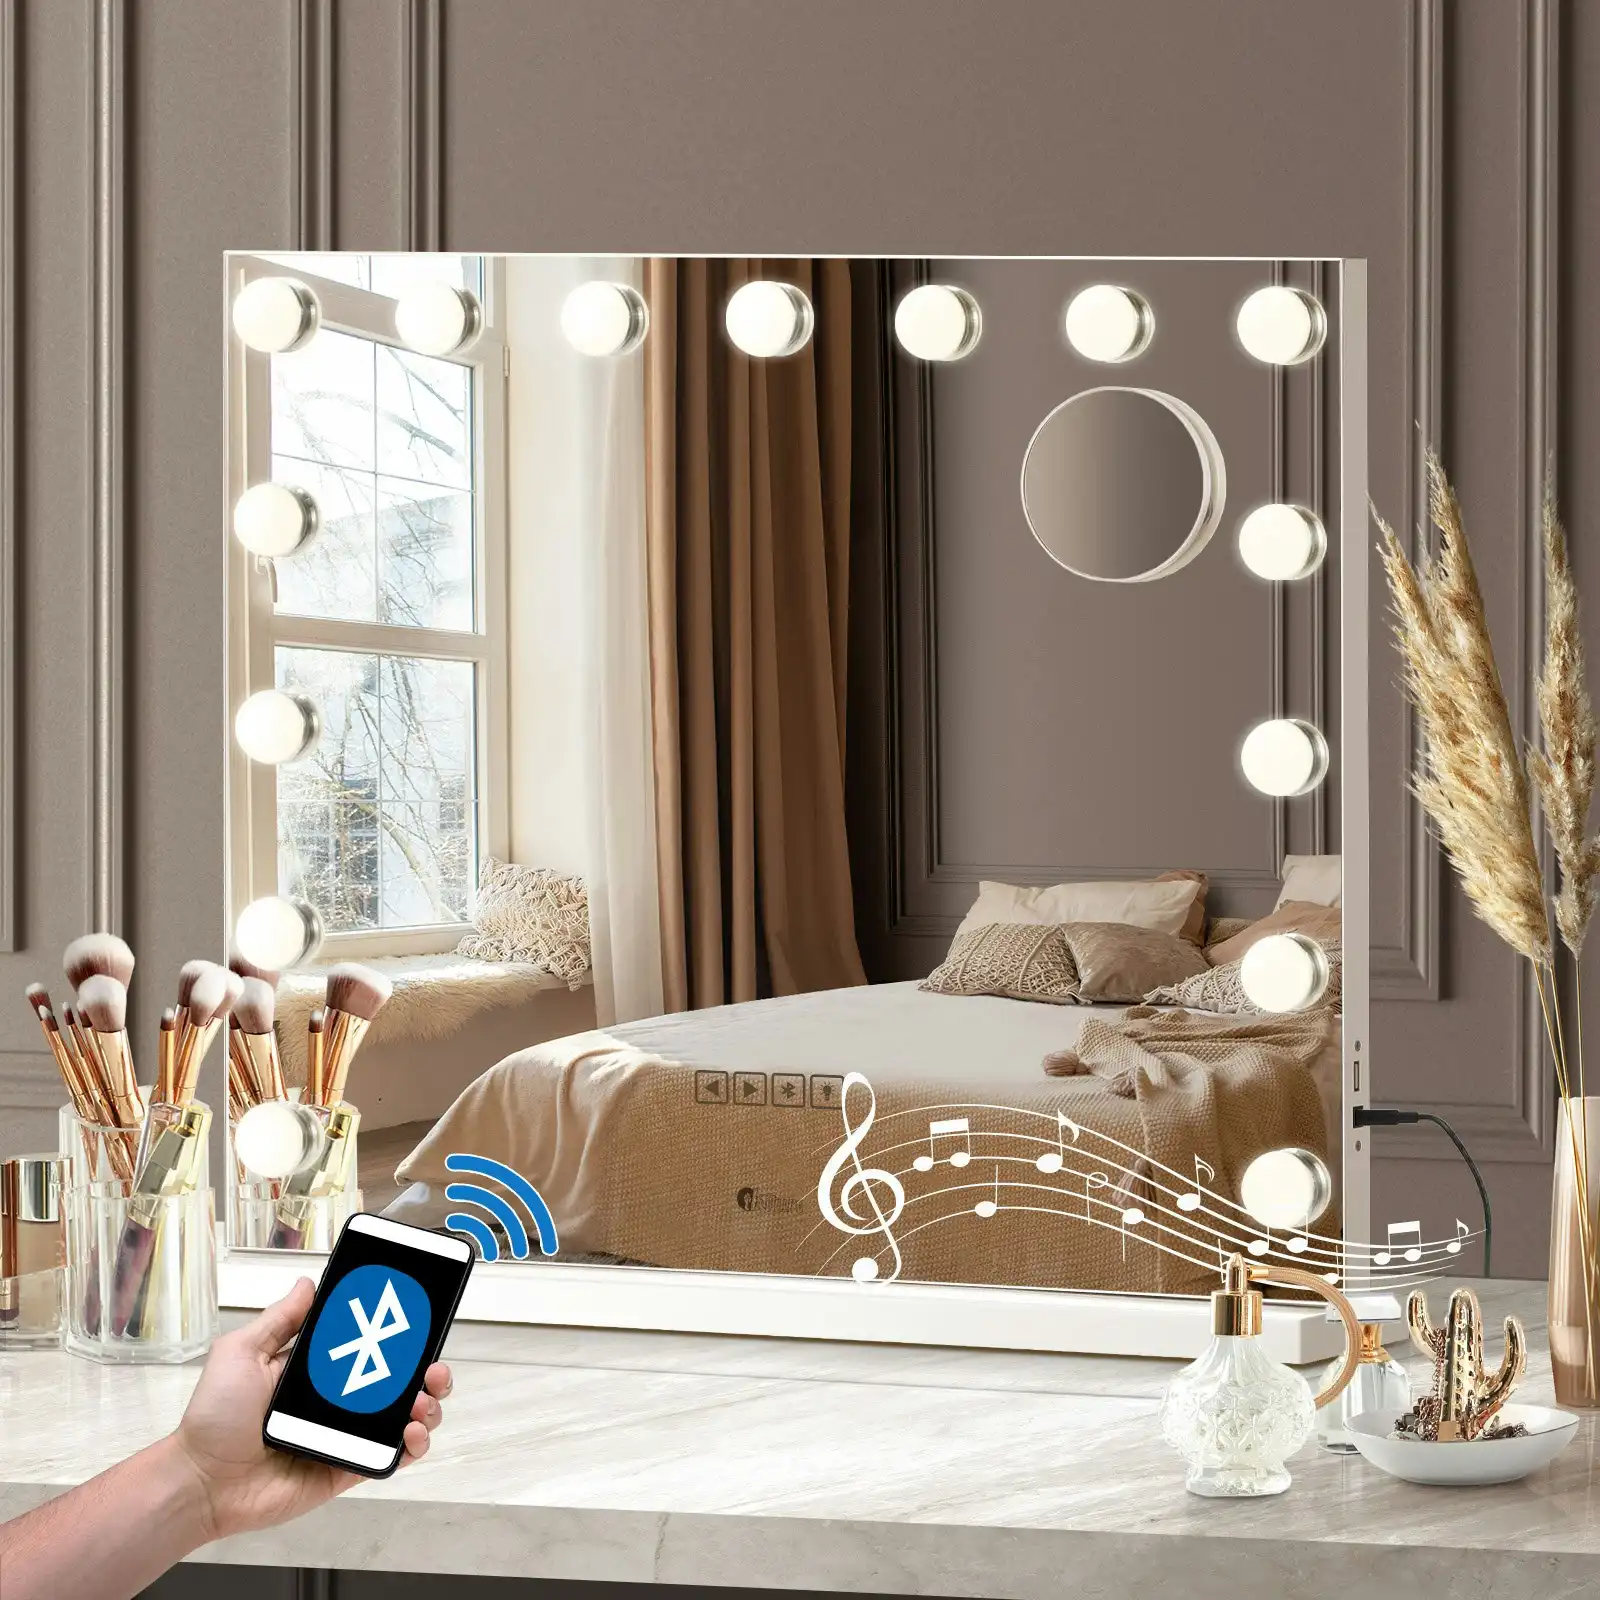 Oikiture 59x48cm Bluetooth Hollywood Makeup Mirrors with LED Light Vanity Mirror